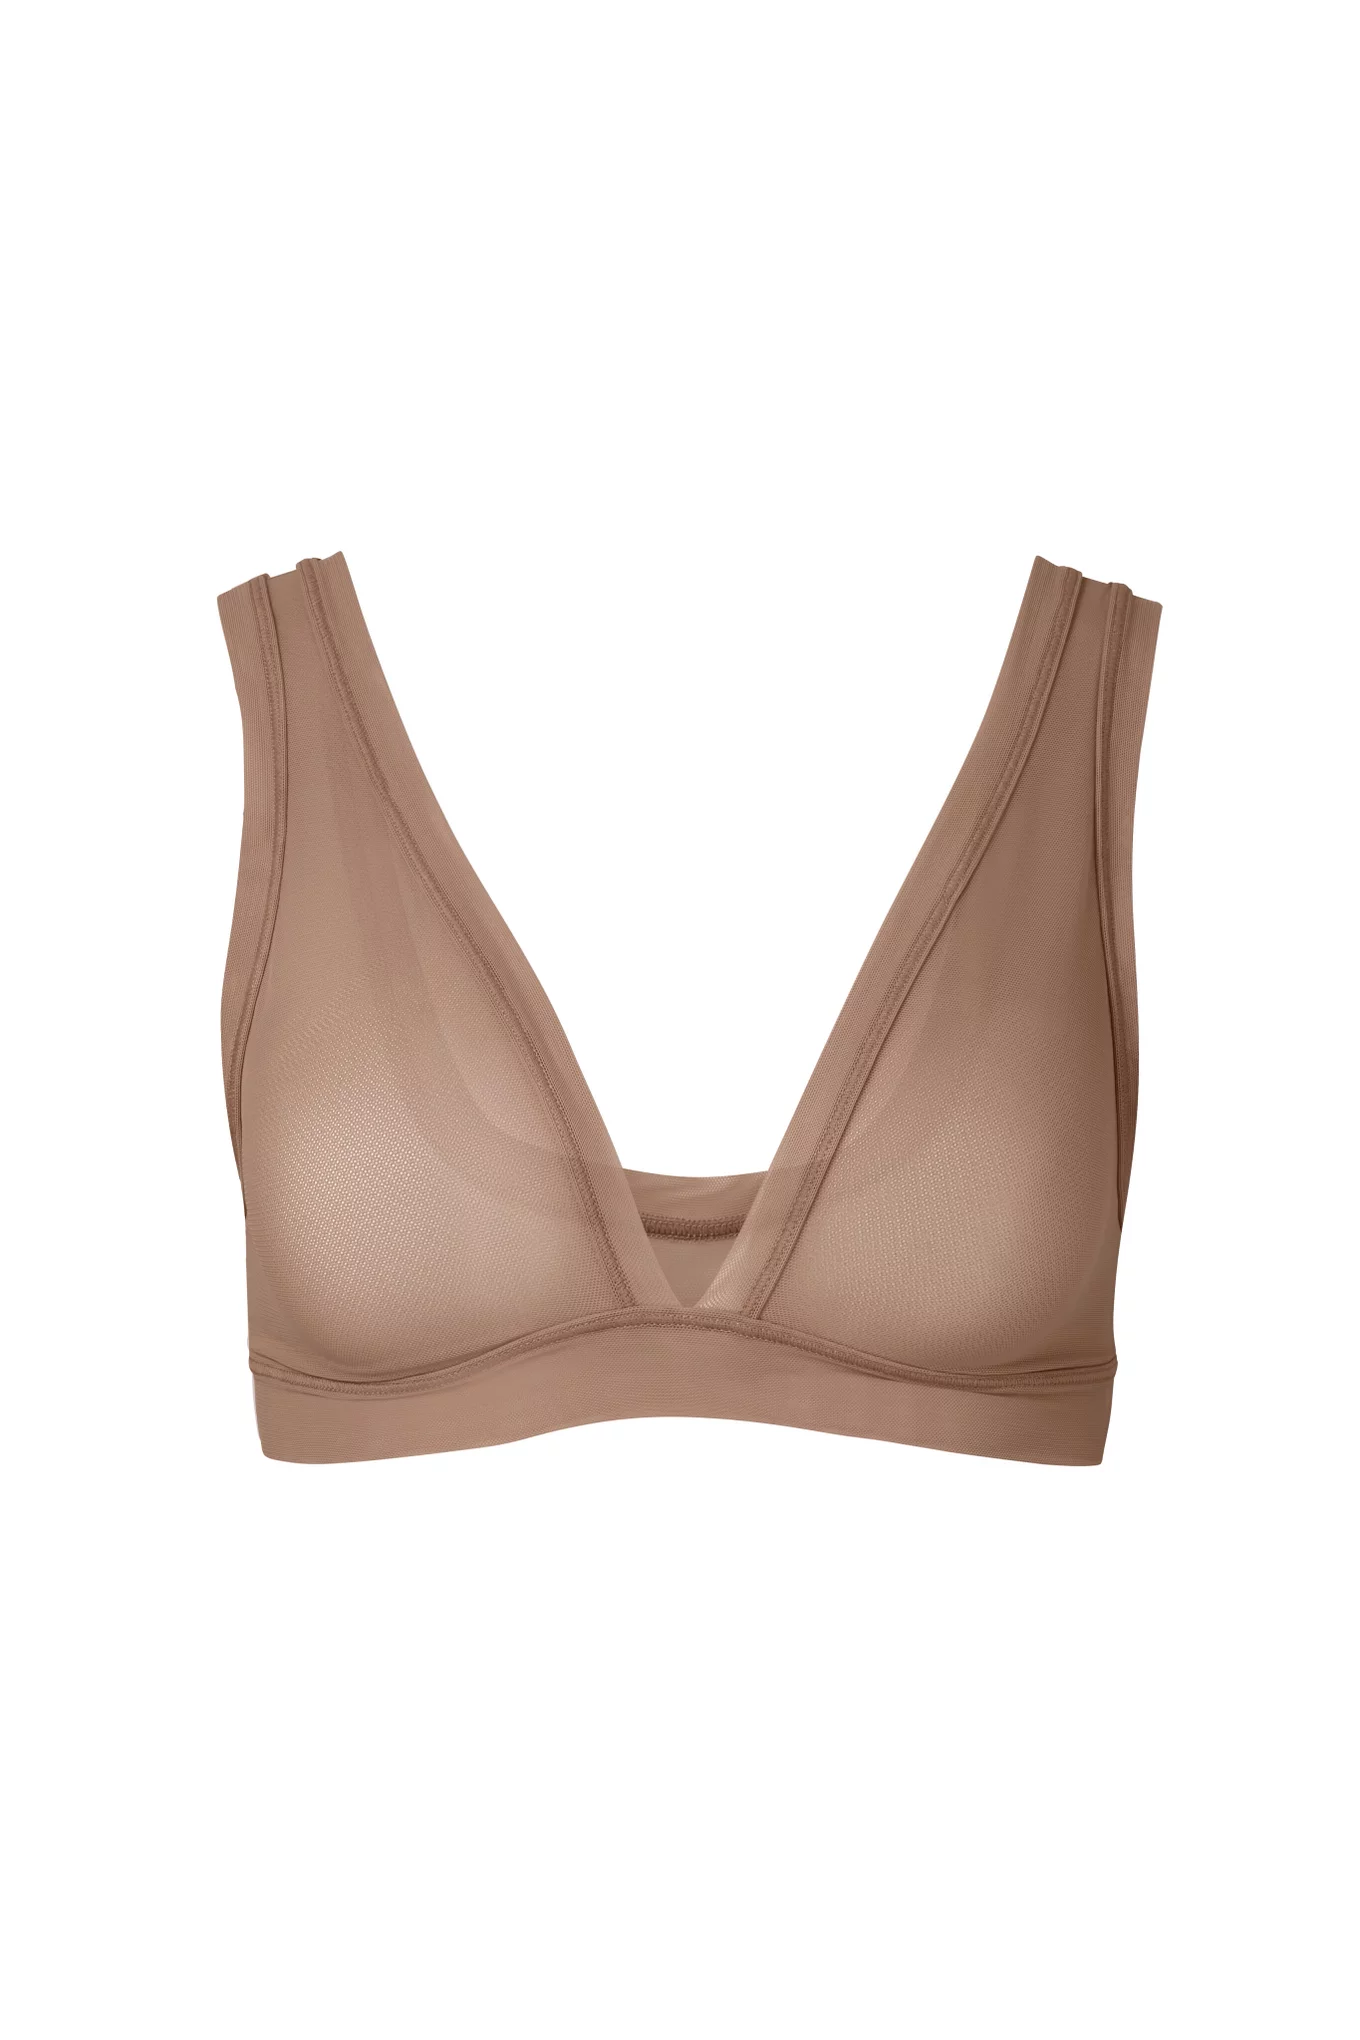 Bra Classic 124930 (2 nude colors) from Milavitsa - buy in the online store.